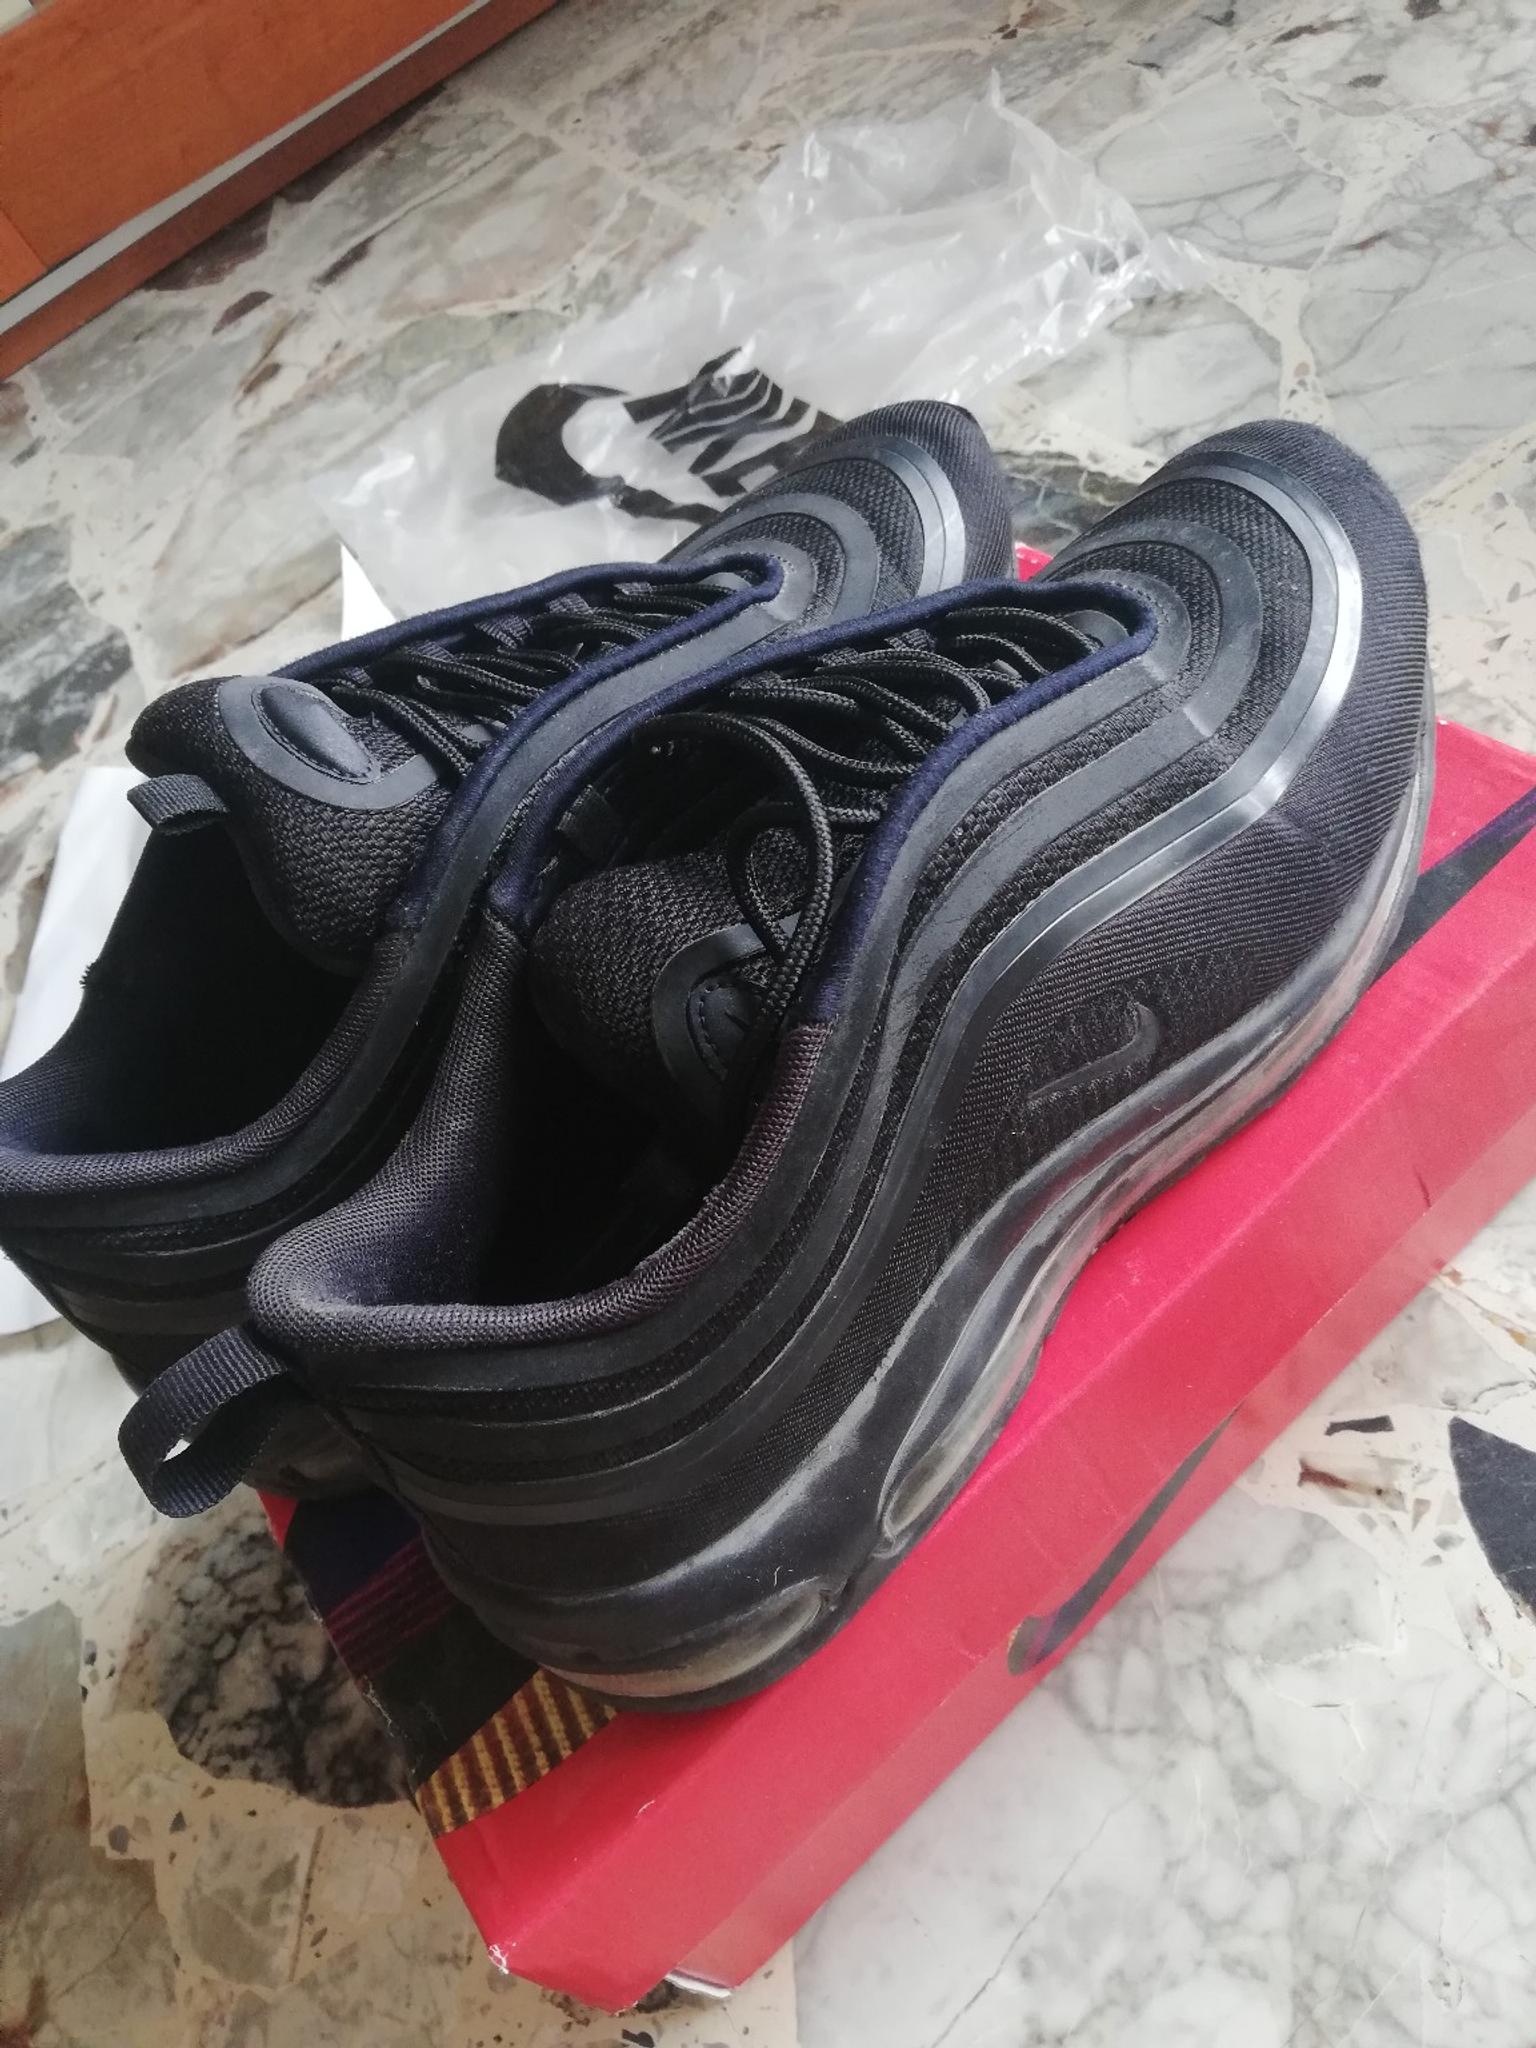 Nike Air max 97, taglia 45 in 20161 Milan for €29.00 for sale | Shpock